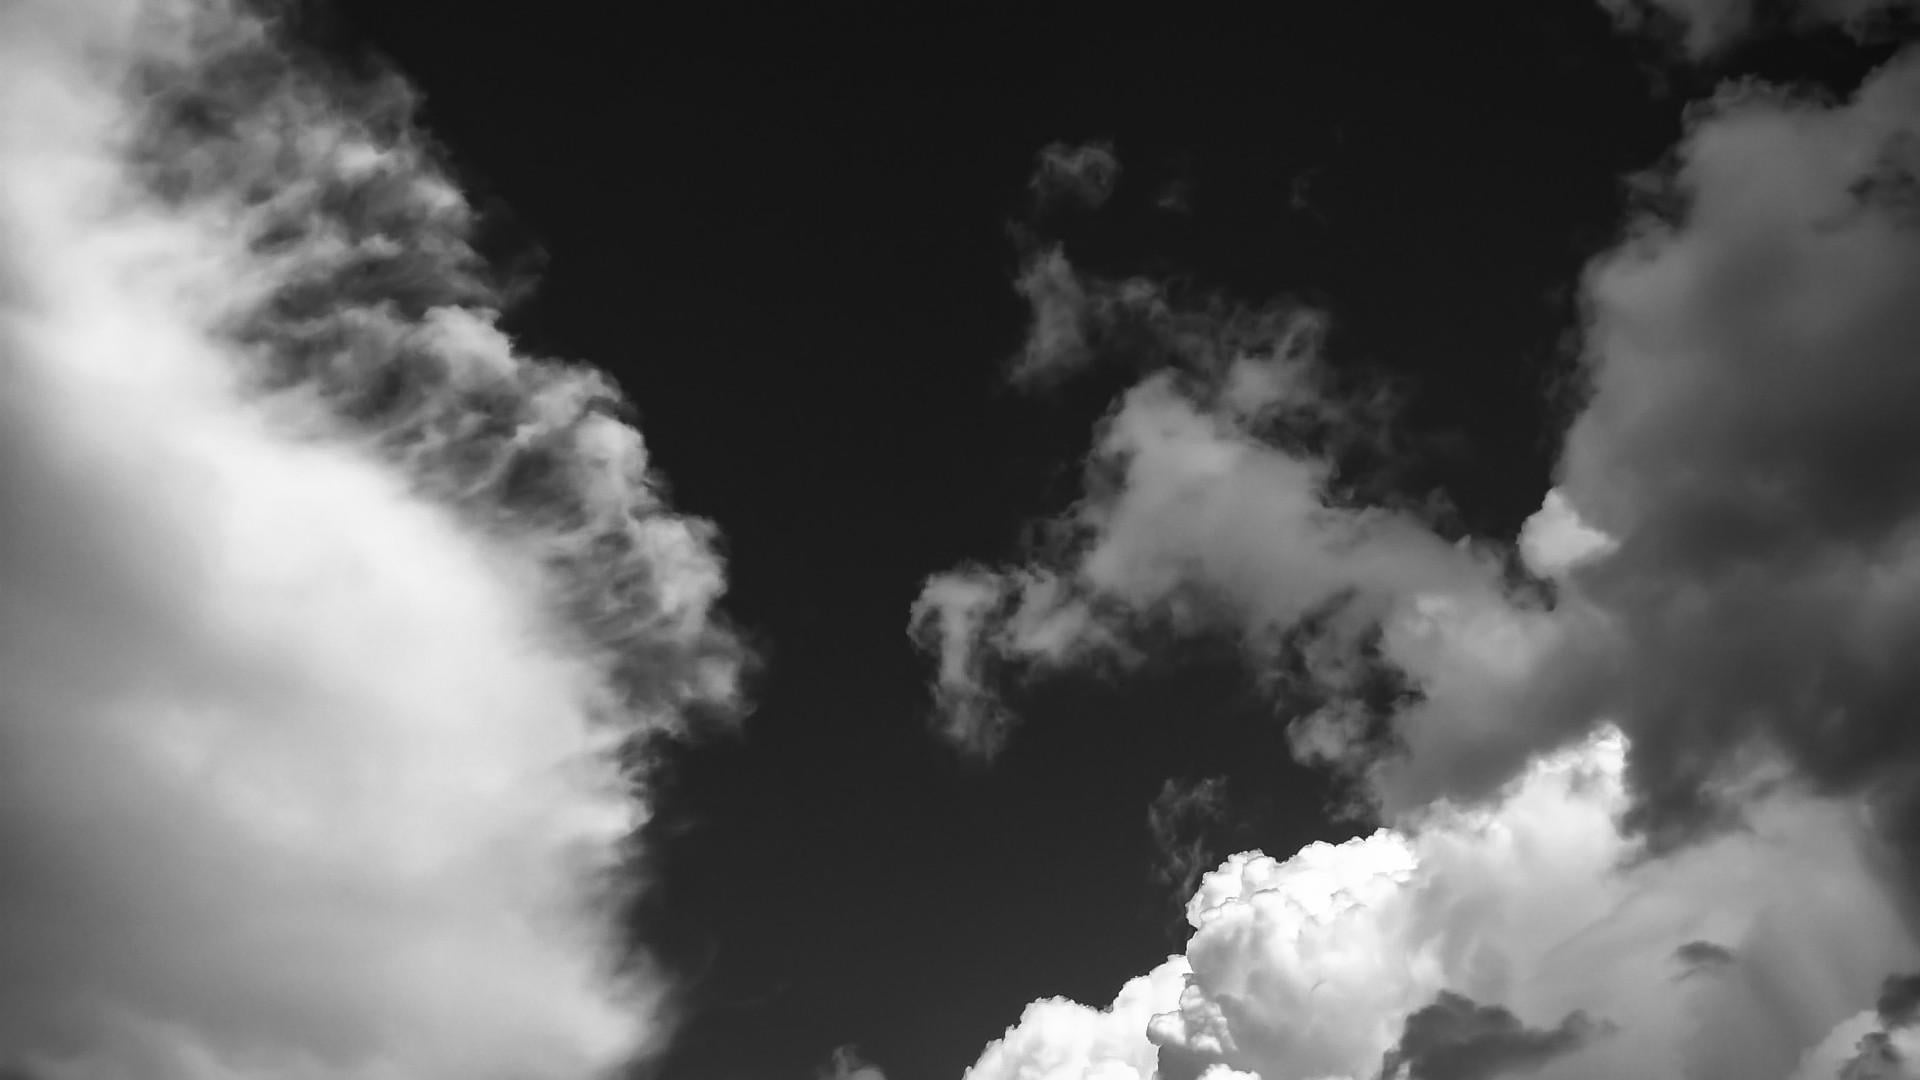 clouds, abstract, nature, black and white, sky, b&w, cloud - sky